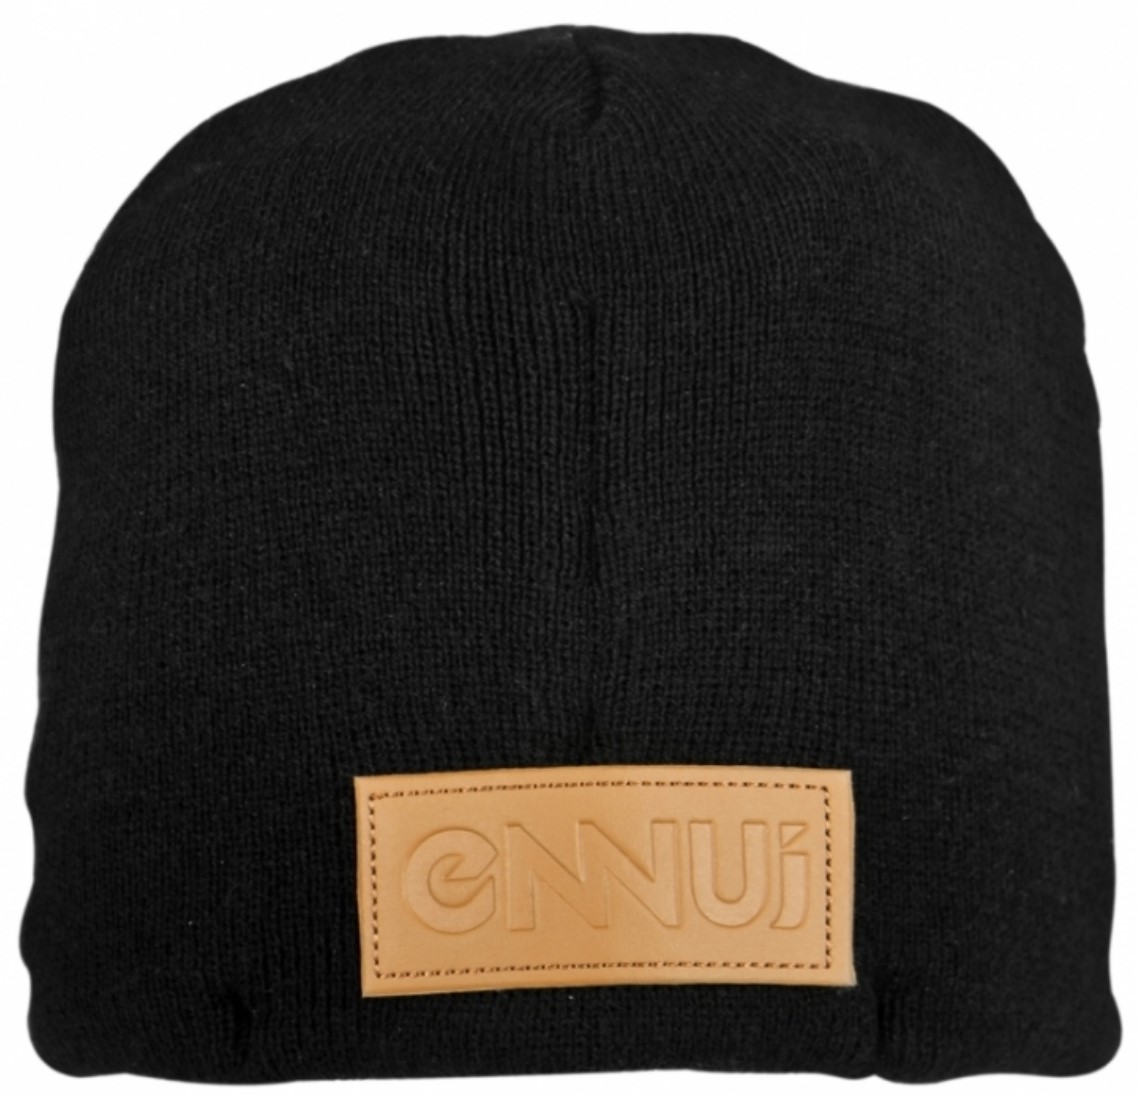 Ennui City Beanie with protection inside